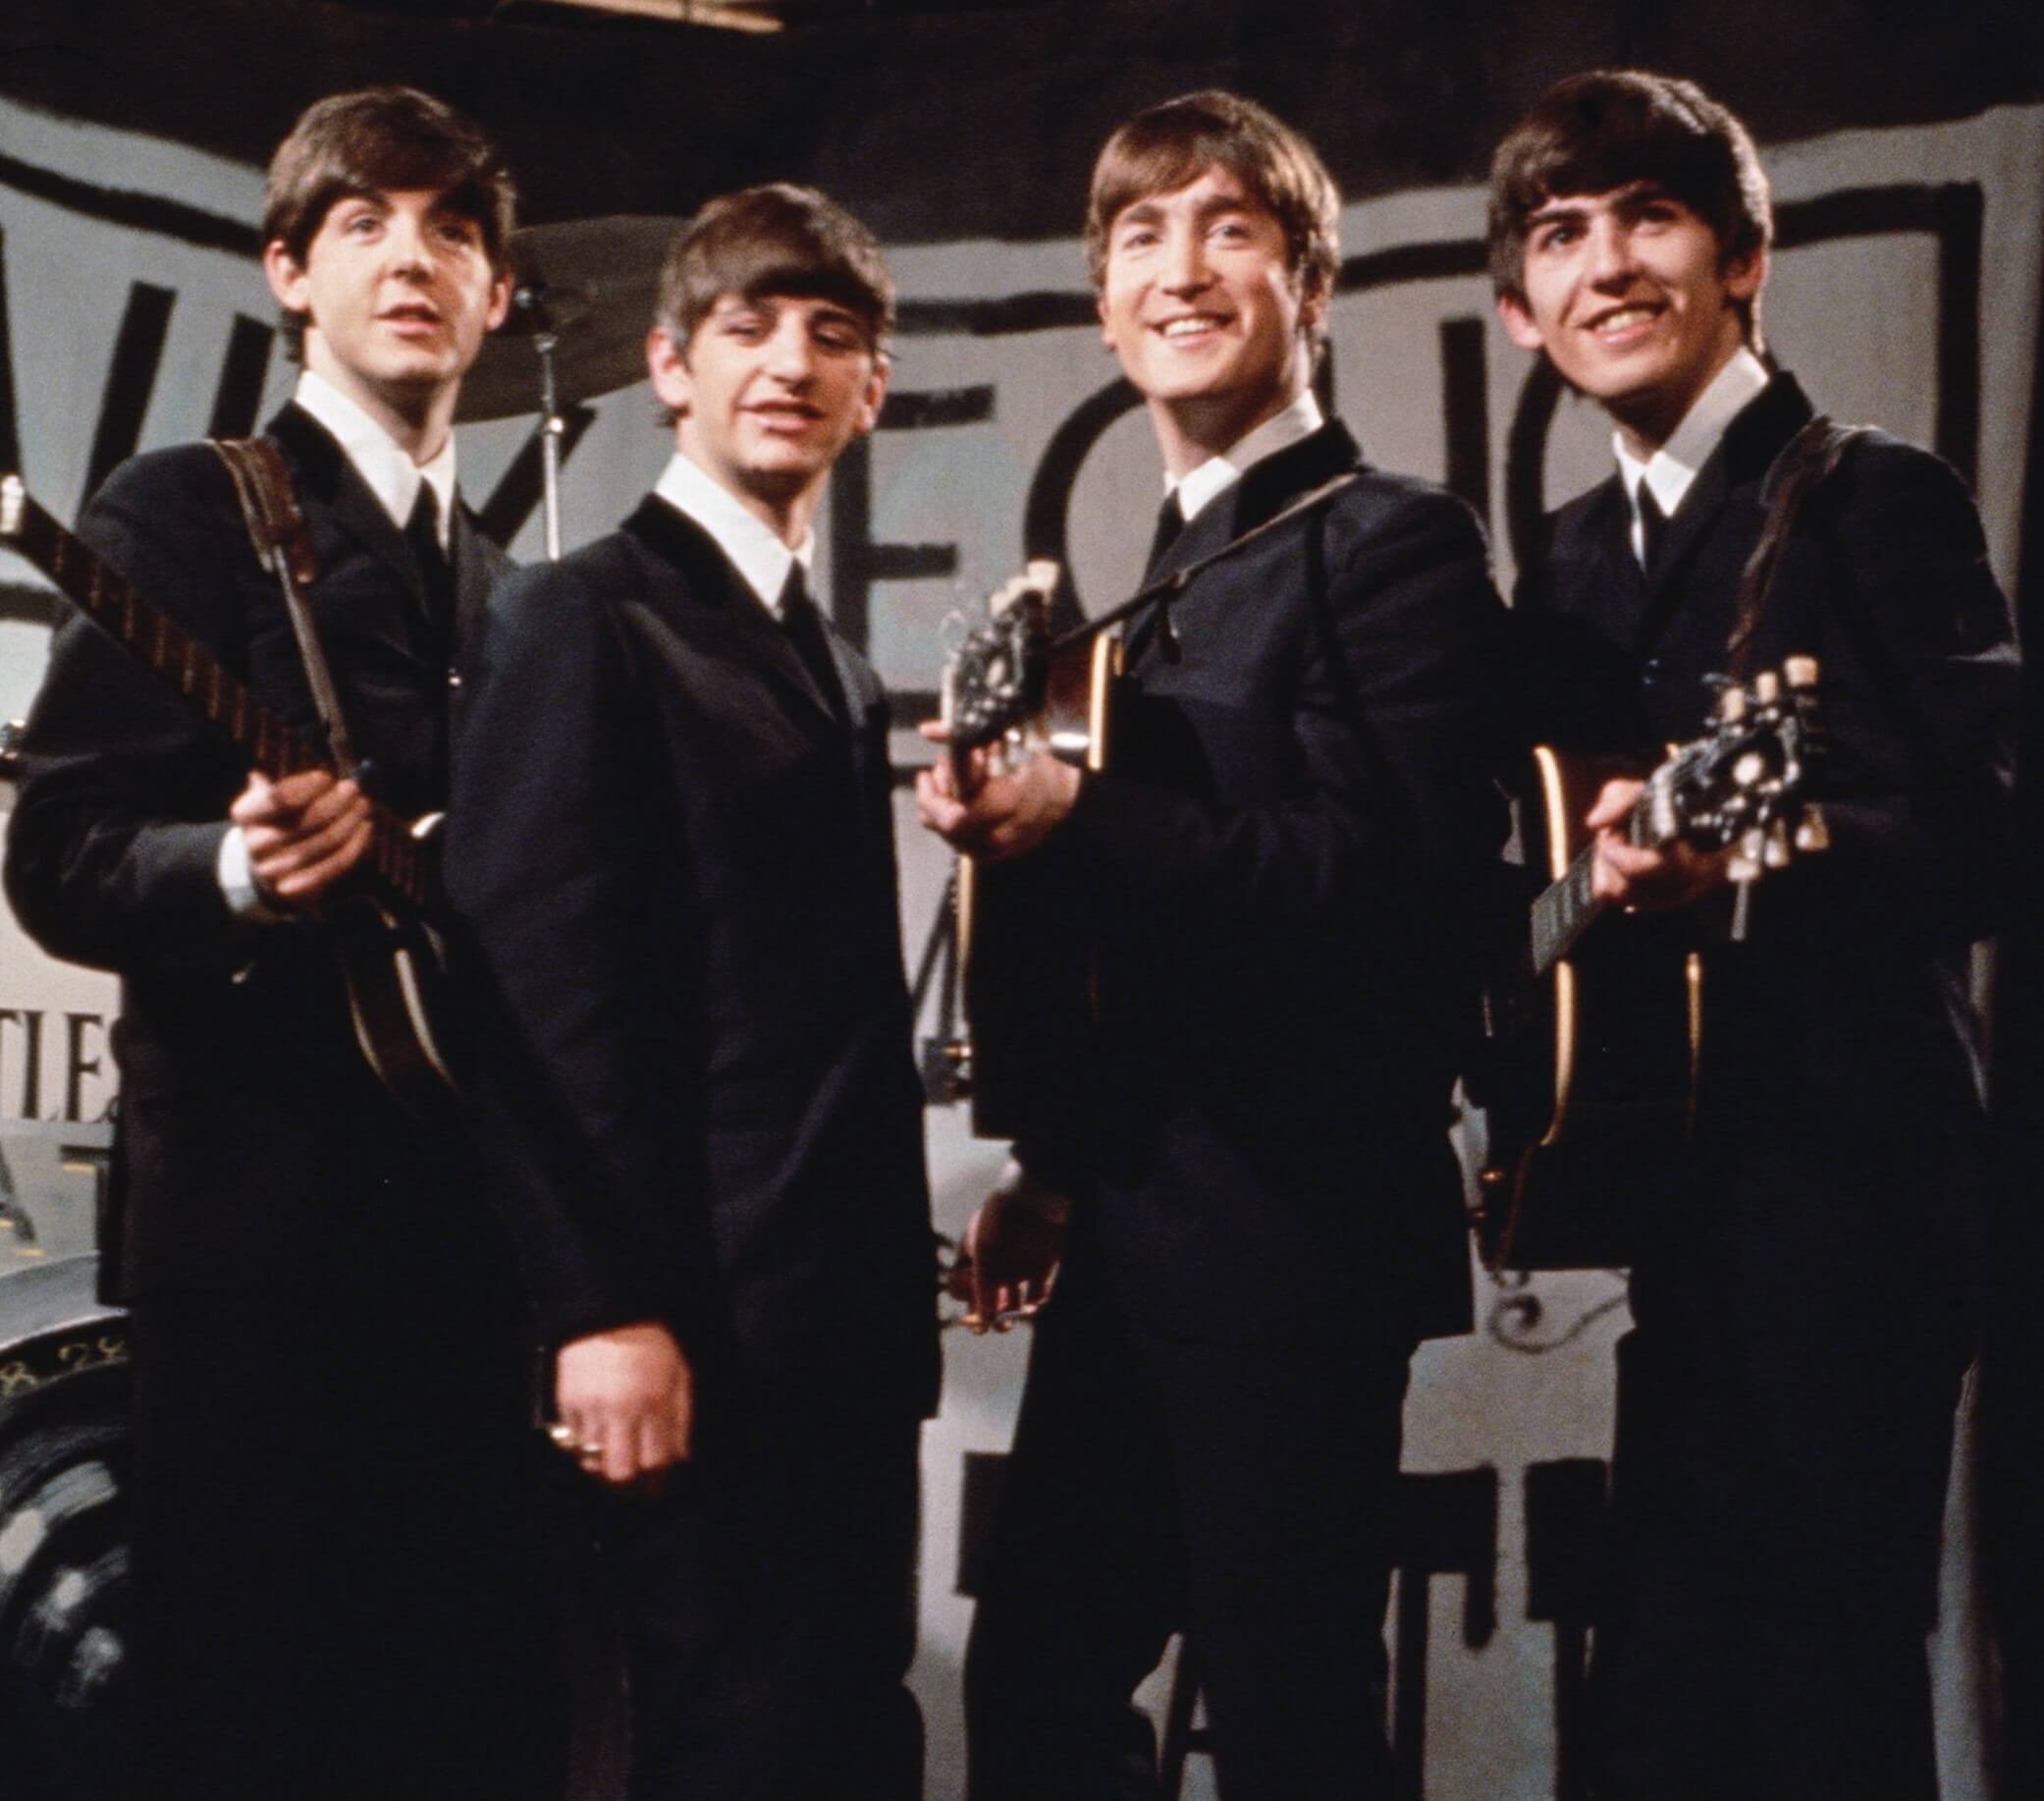 The Beatles wearing suits